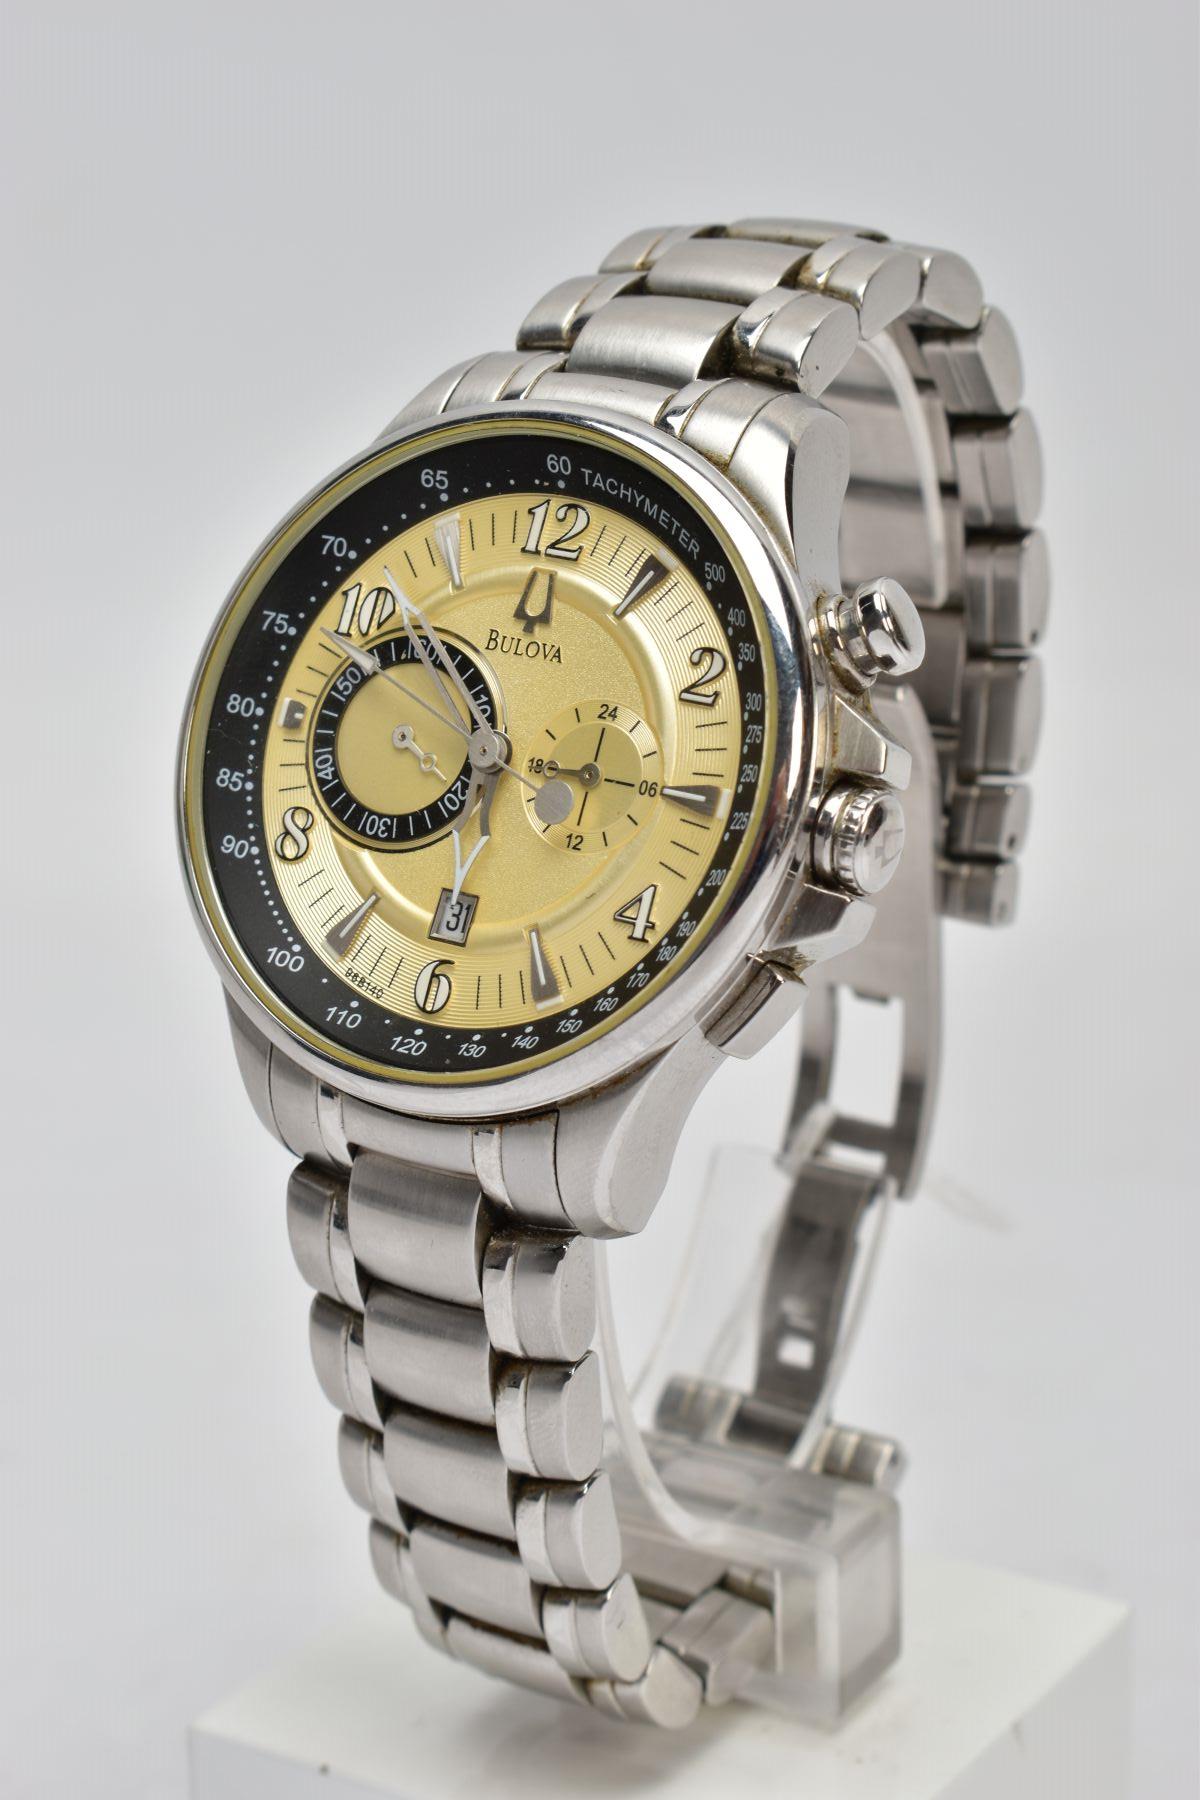 A GENTS 'BULOVA' CHRONOGRAPH WRISTWATCH, round gold dial signed 'Bulova', Arabic numerals and - Image 2 of 4